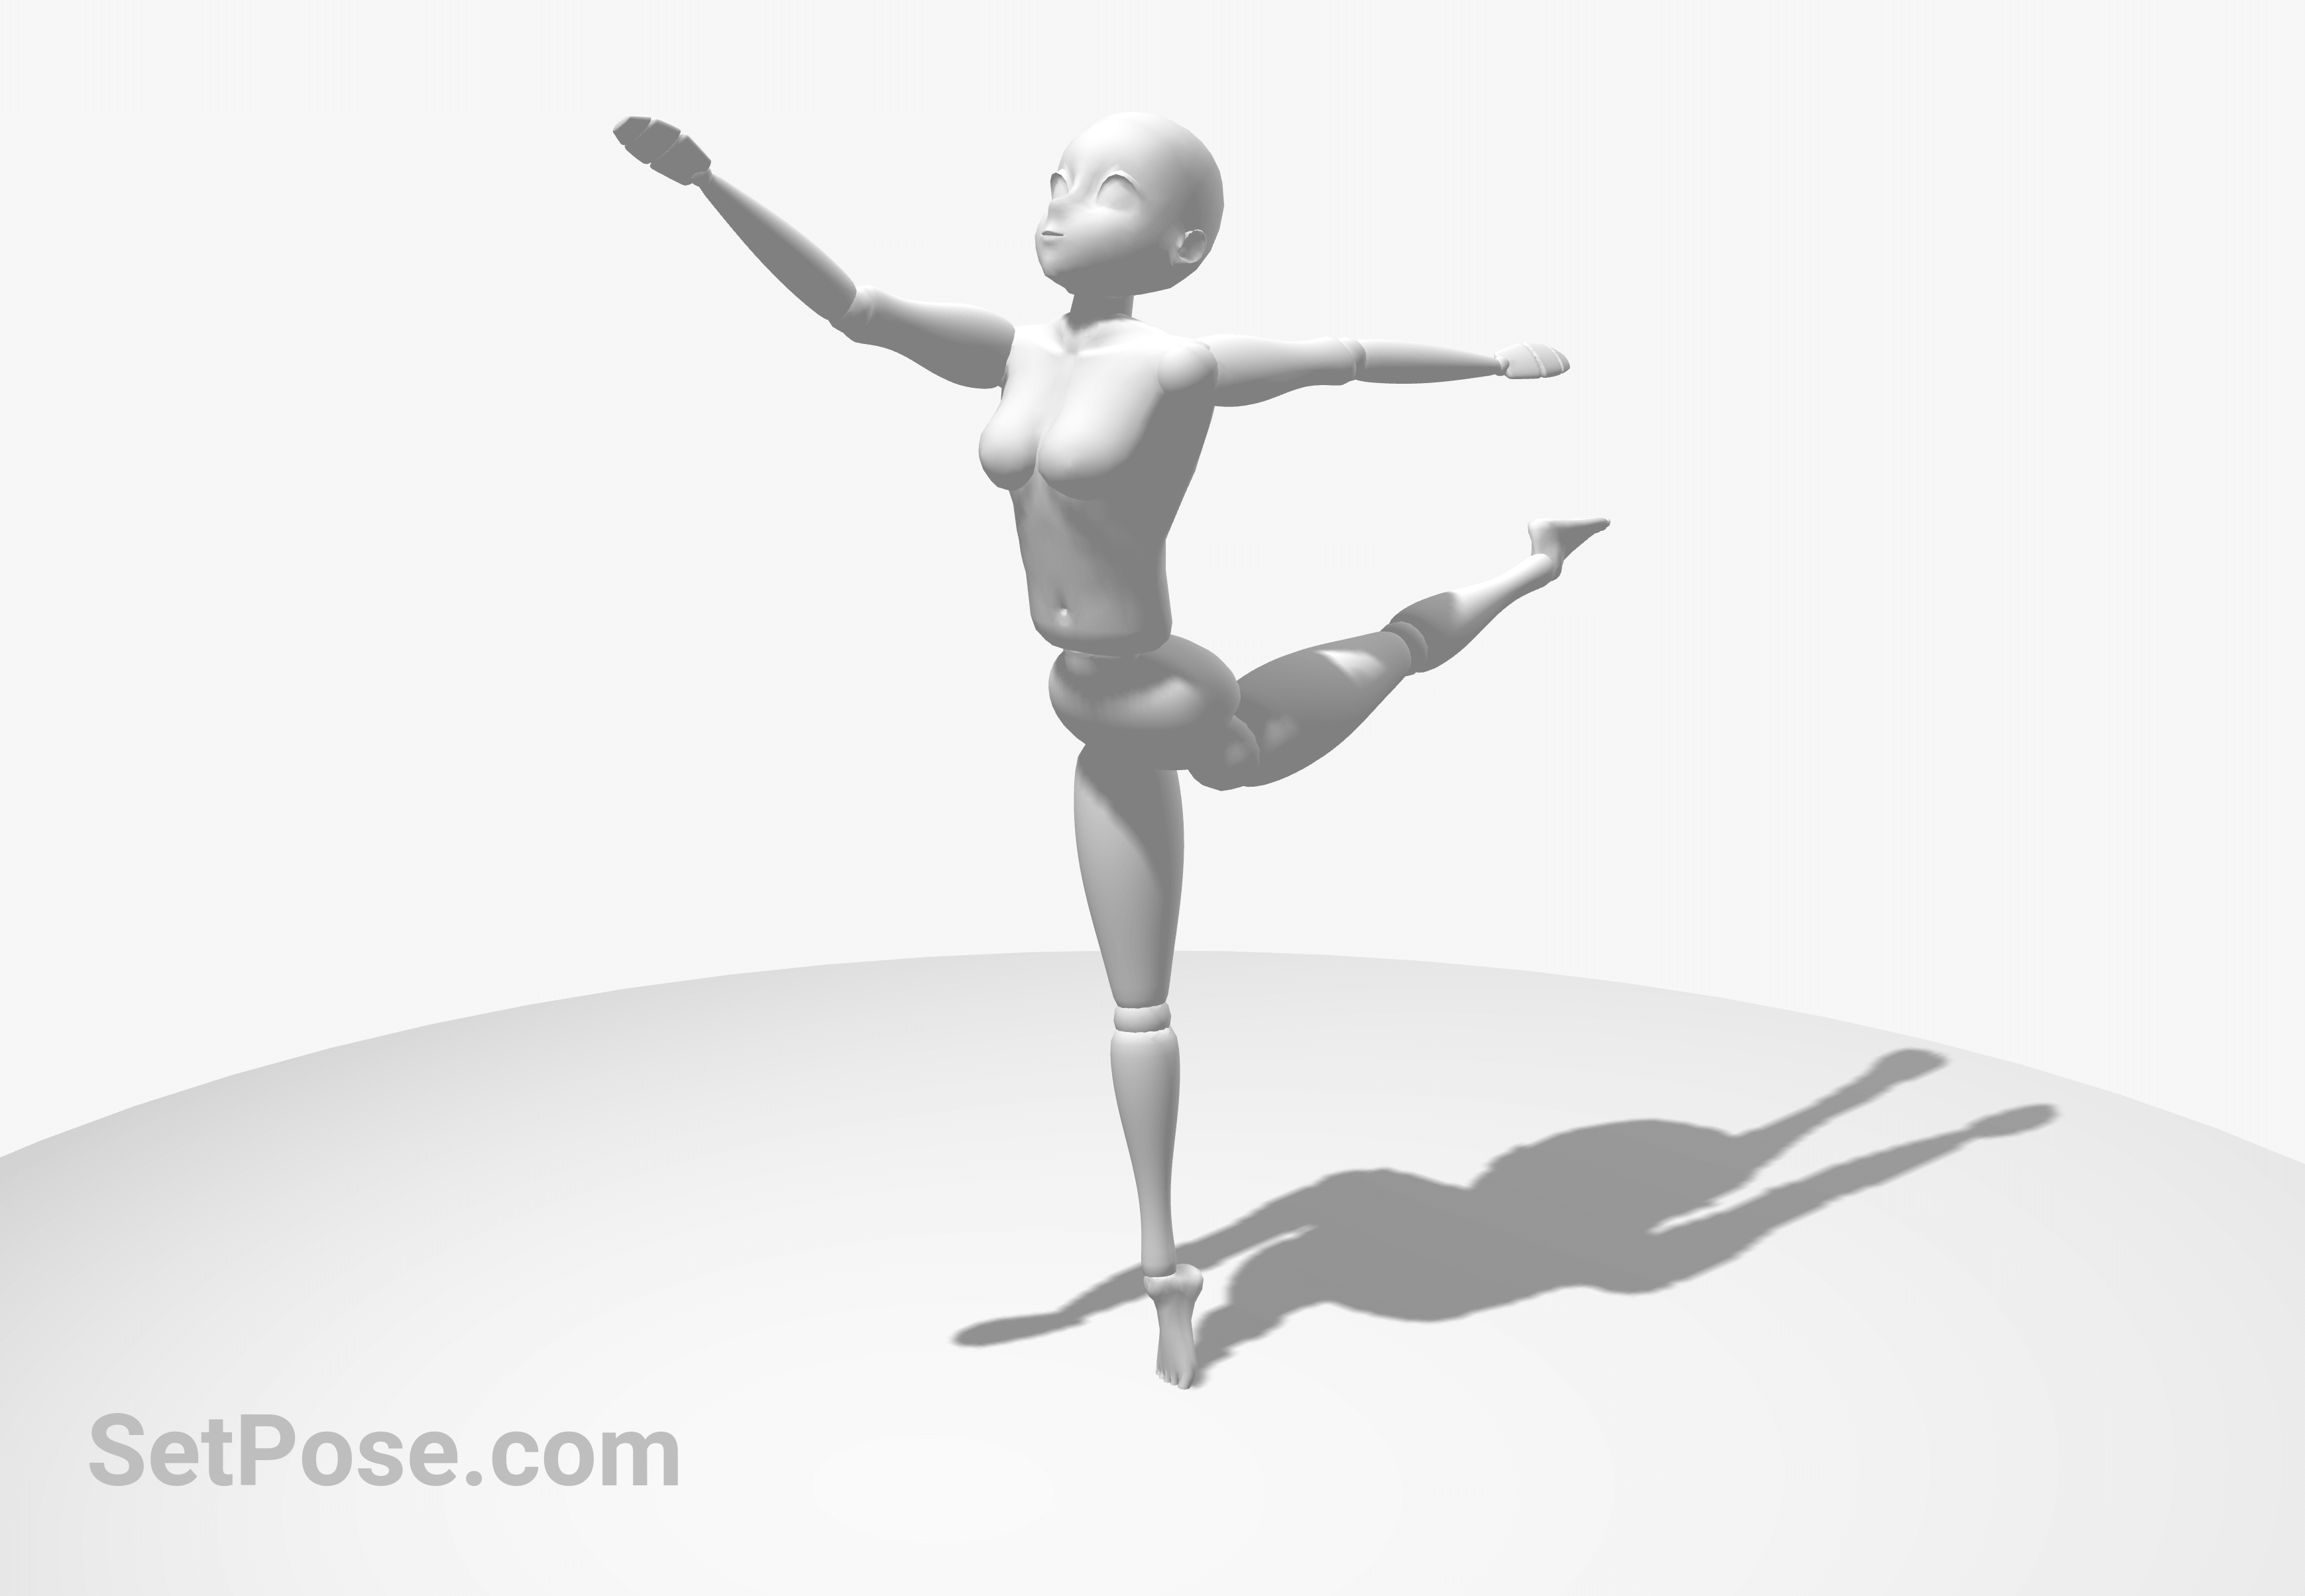 27,404 Anime Poses Images, Stock Photos, 3D objects, & Vectors